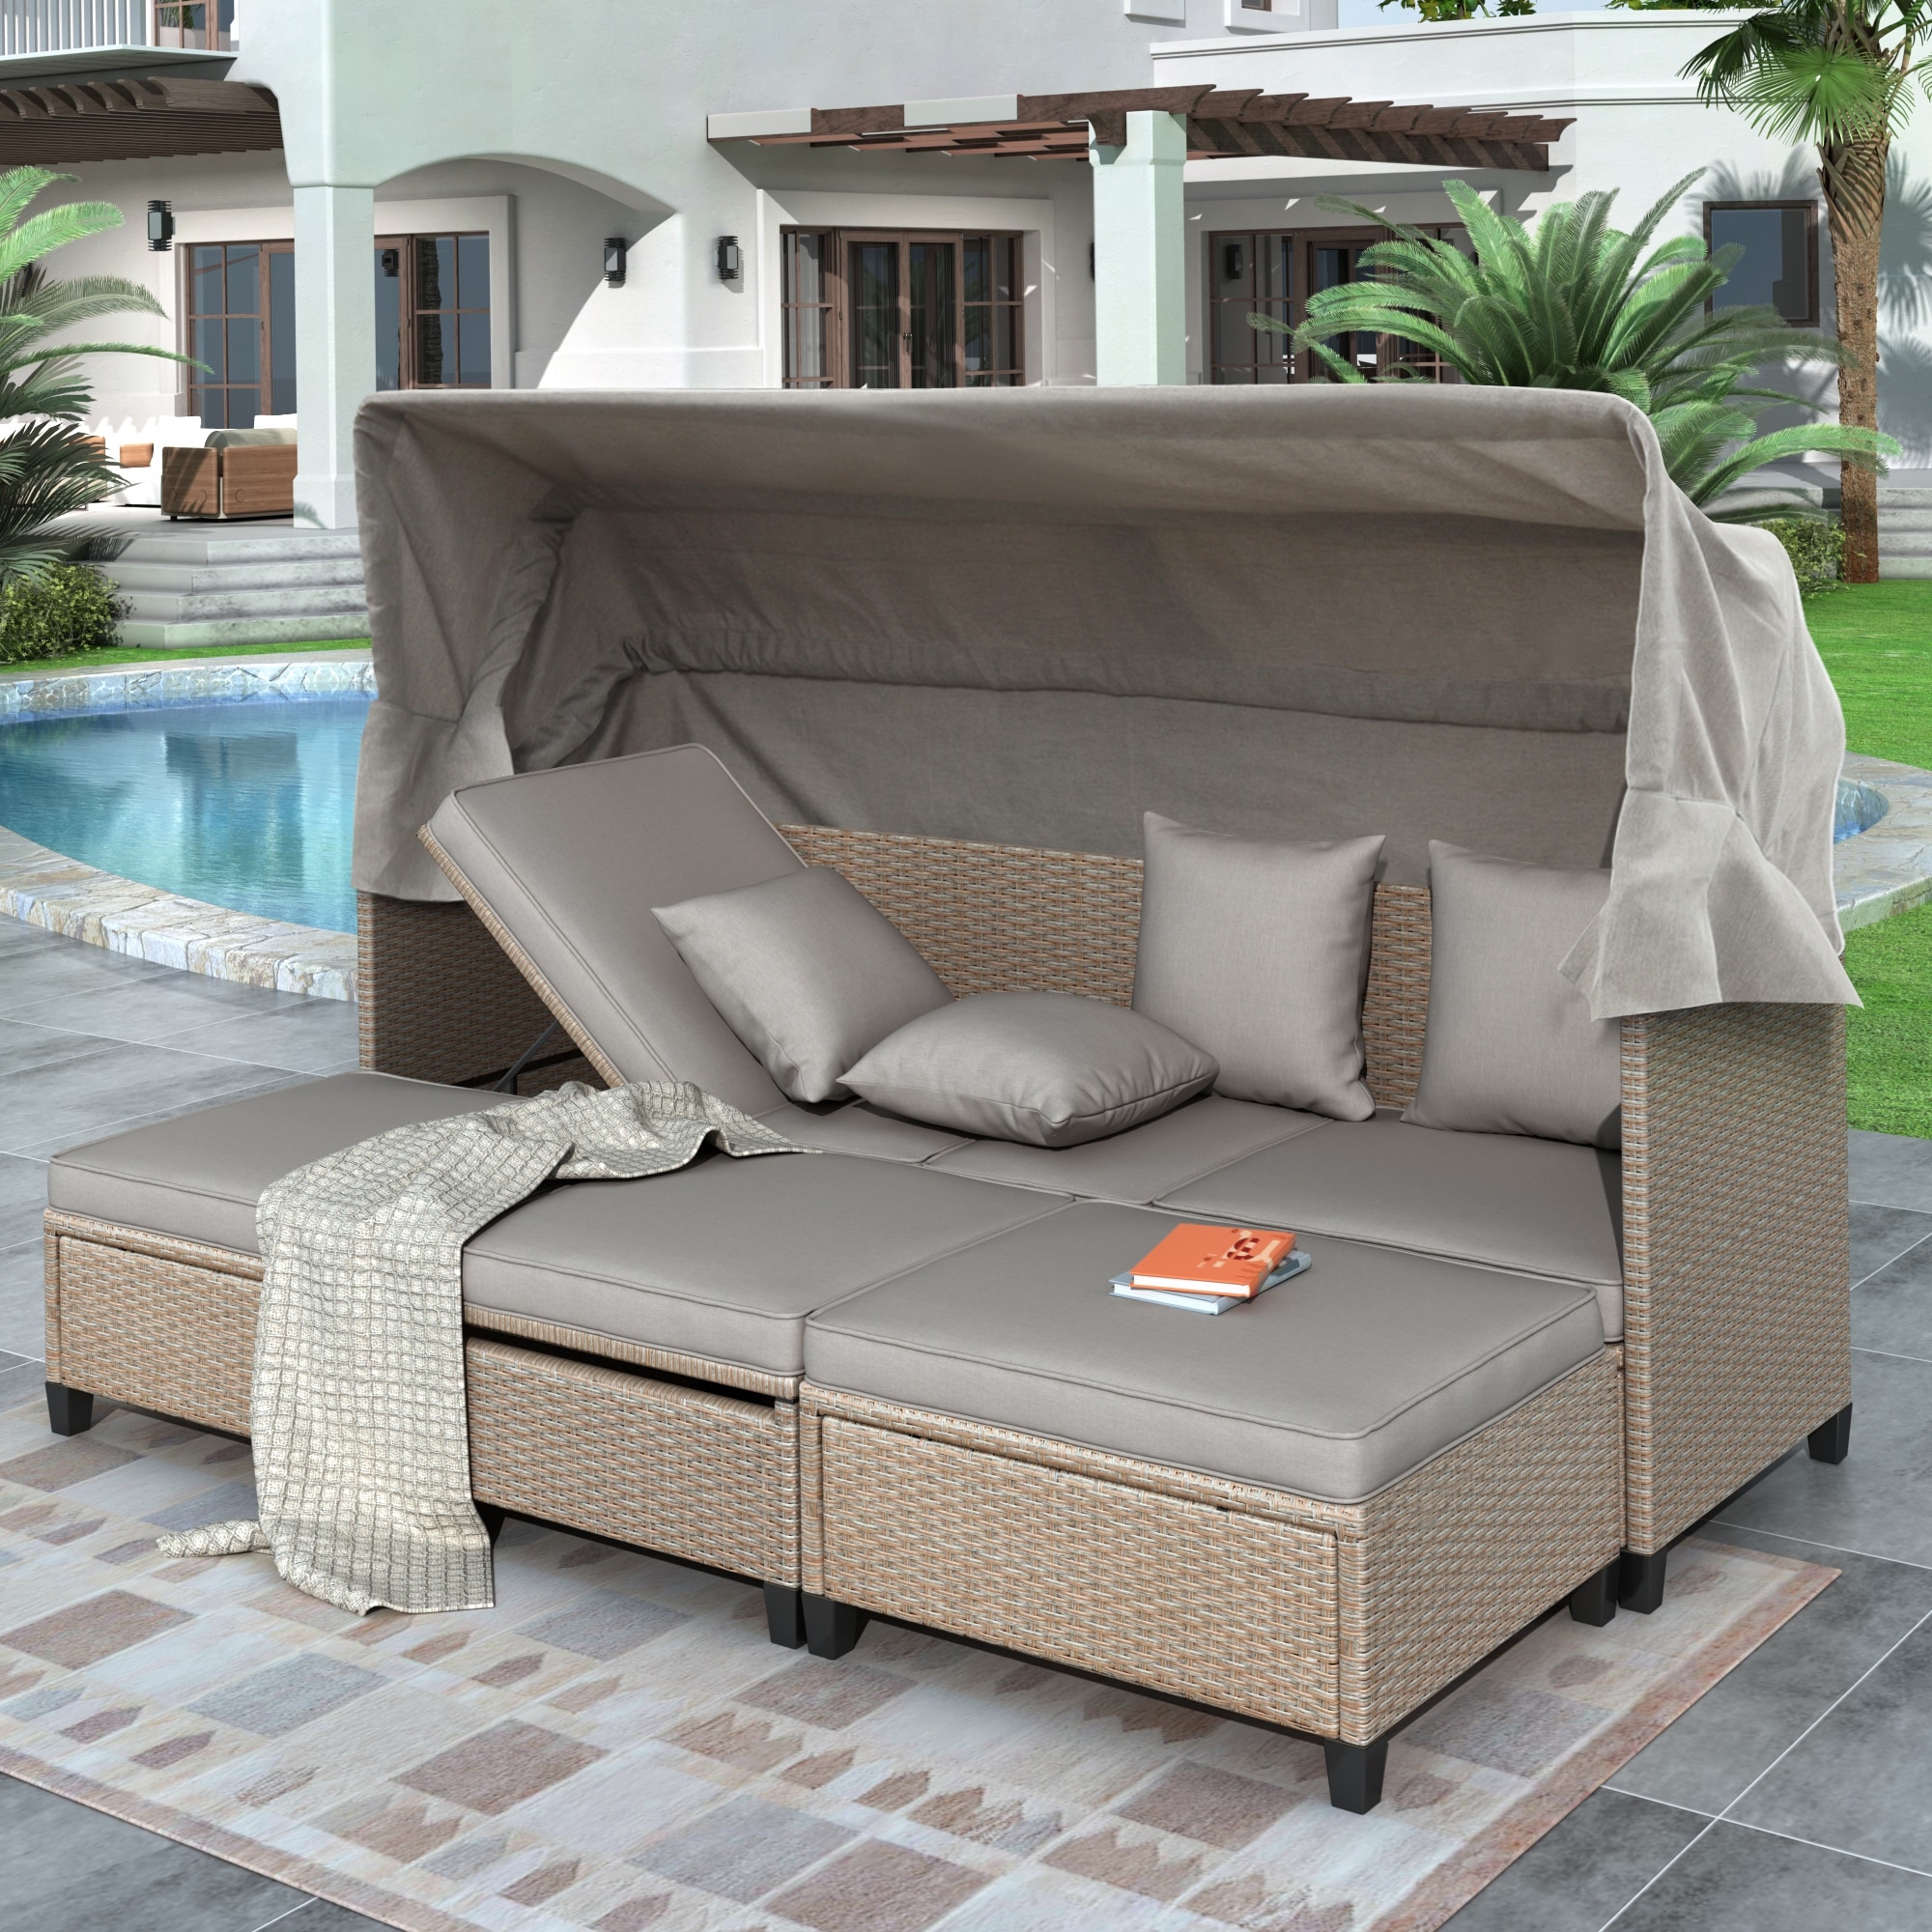 4 Piece Wicker Patio Sofa Set With Retractable Canopy  Cushions And Lifting Table brown